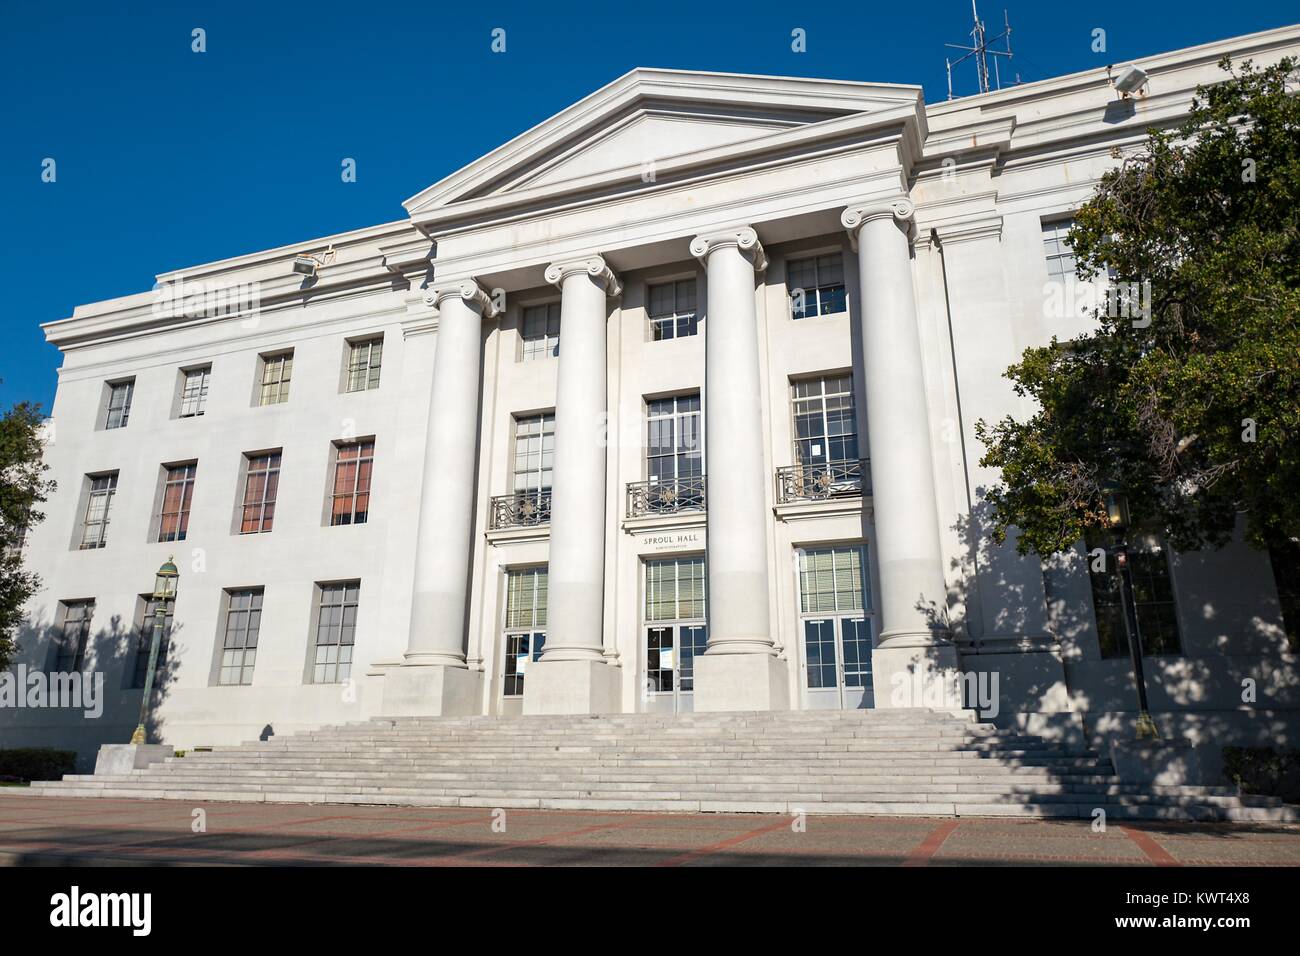 Facade of Sproul Hall, the administrative building at UC Berkeley in Berkeley, California, which is known for being the epicenter of a variety of political protest movements, including the Free Speech movement, Occupy Berkeley, and 1960s protests against the Vietnam War, October 6, 2017. () Stock Photo